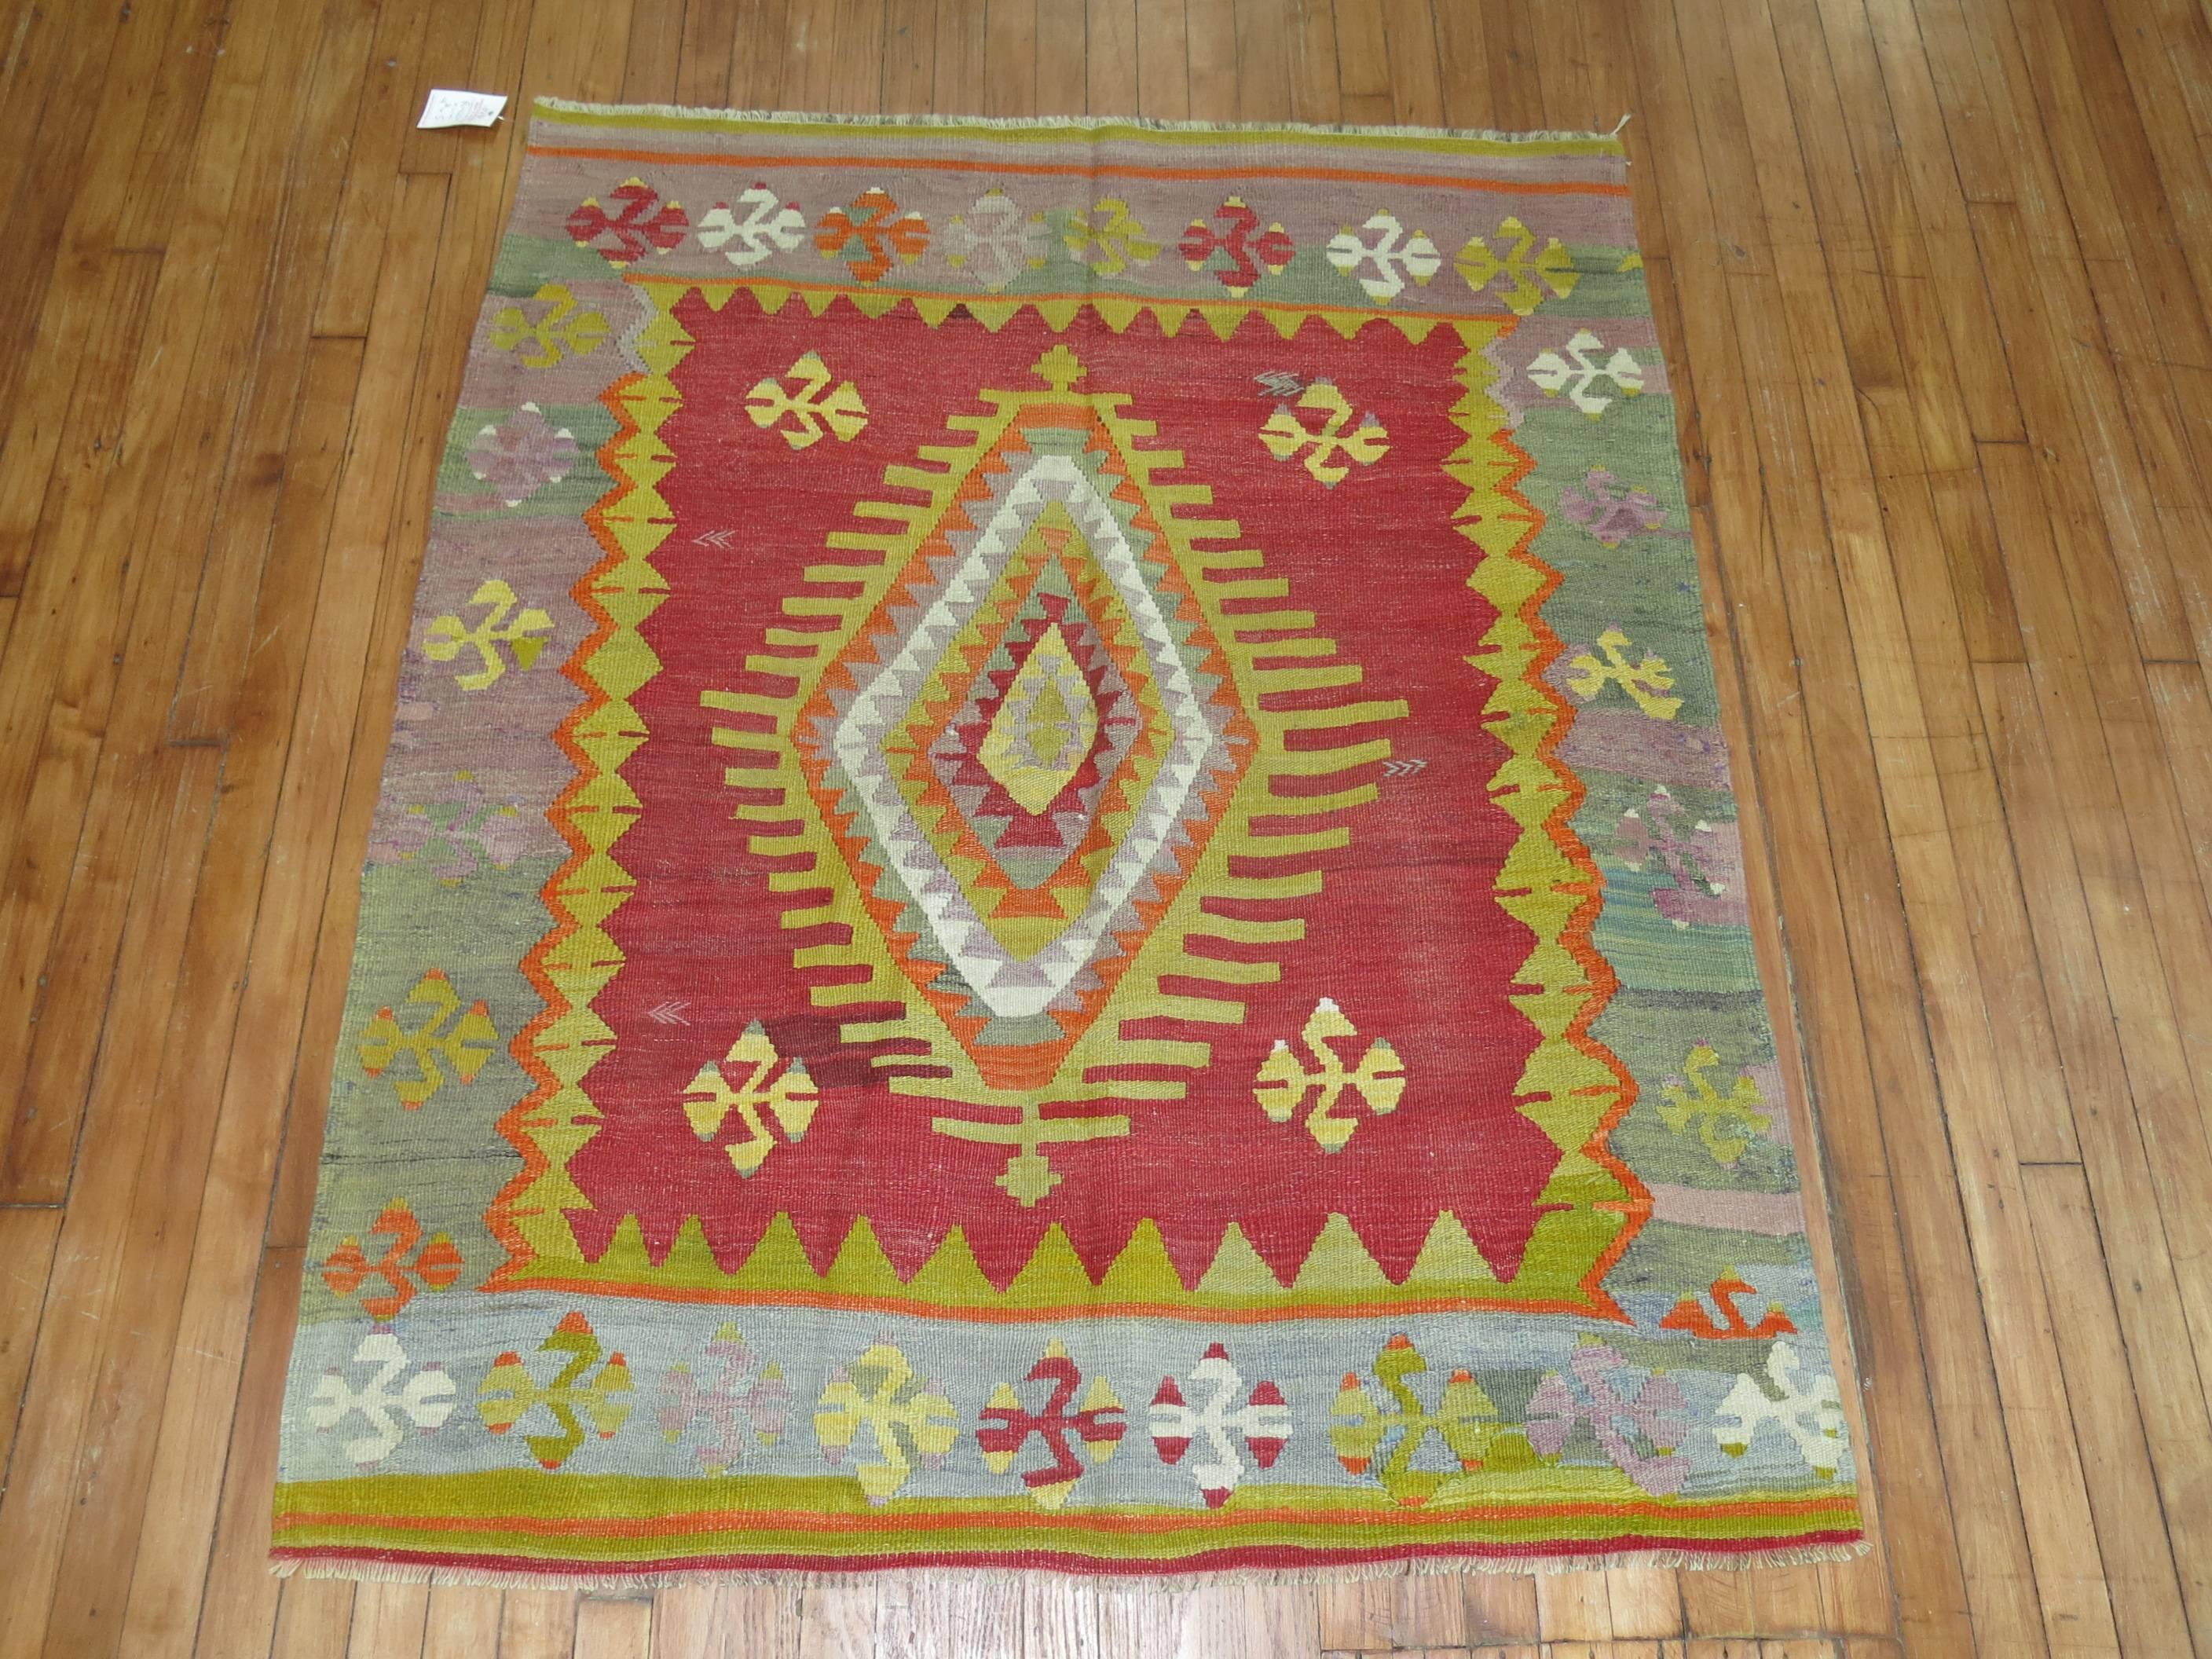 A one of a kind vintage Turkish Kilim with a traditional central medallion and border design. The field is a bright red, accents in dominant lavender and green accents

Measures: 4'2” x 5'.